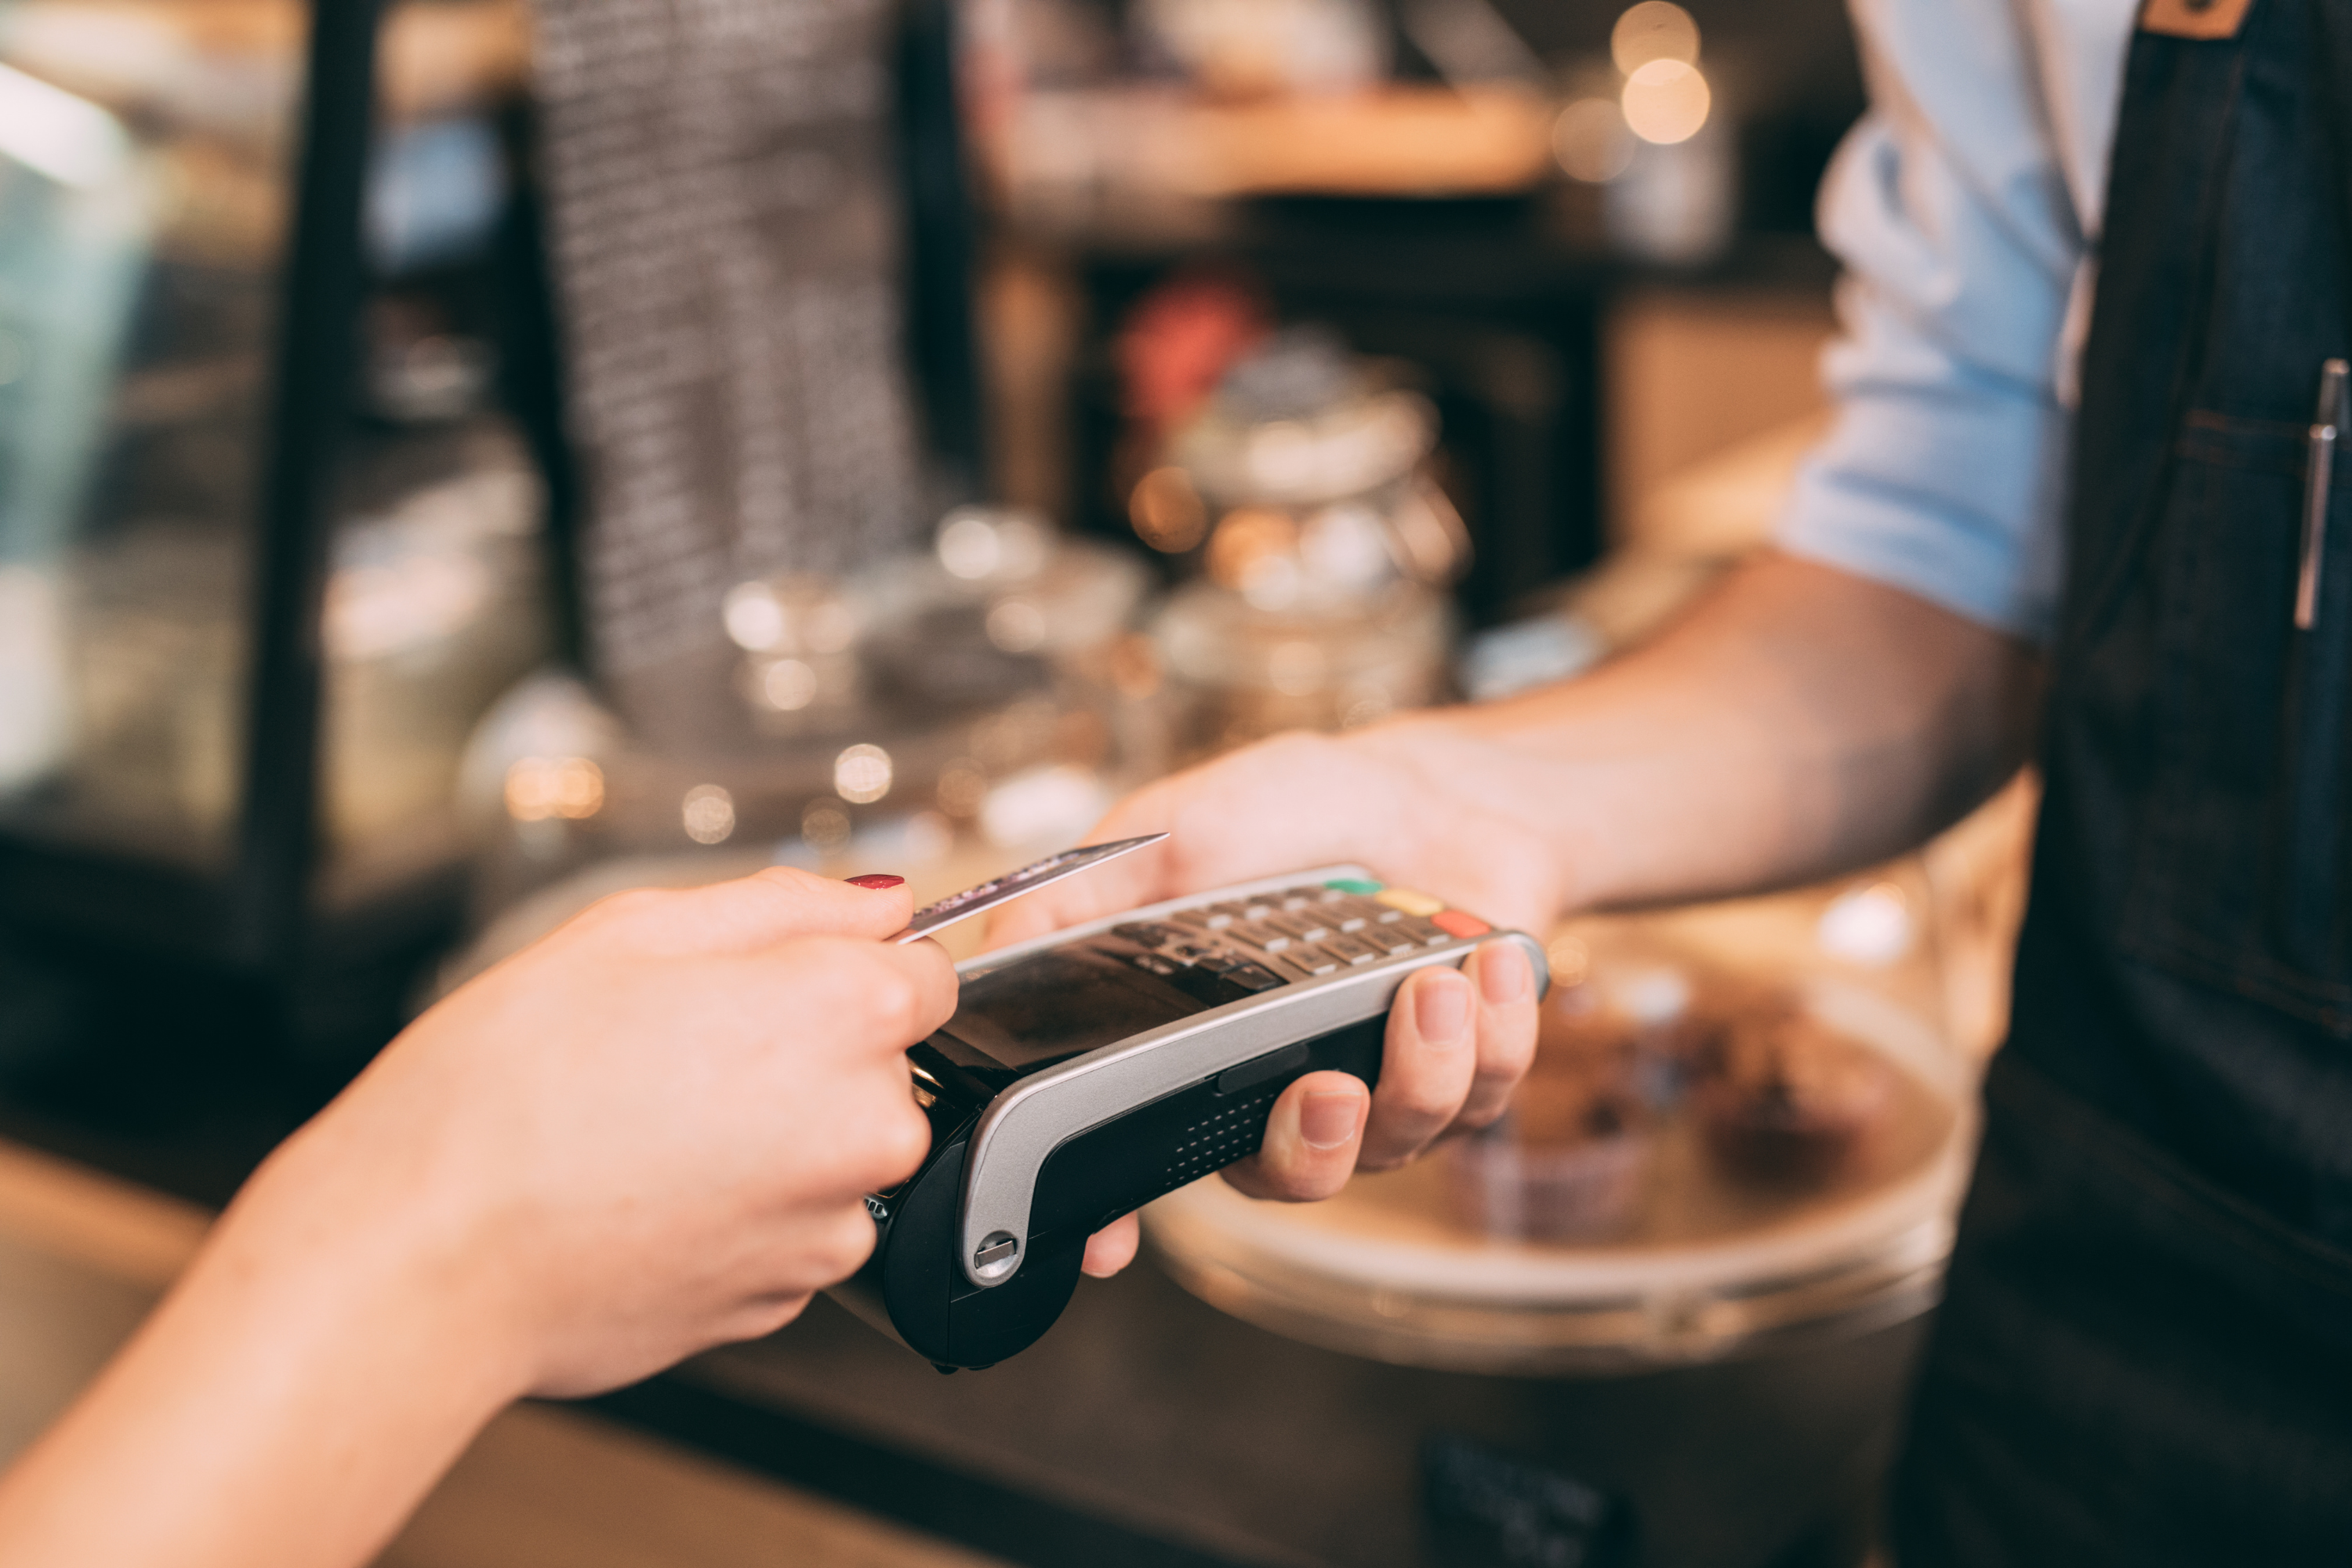 credit card payment at a restaurant